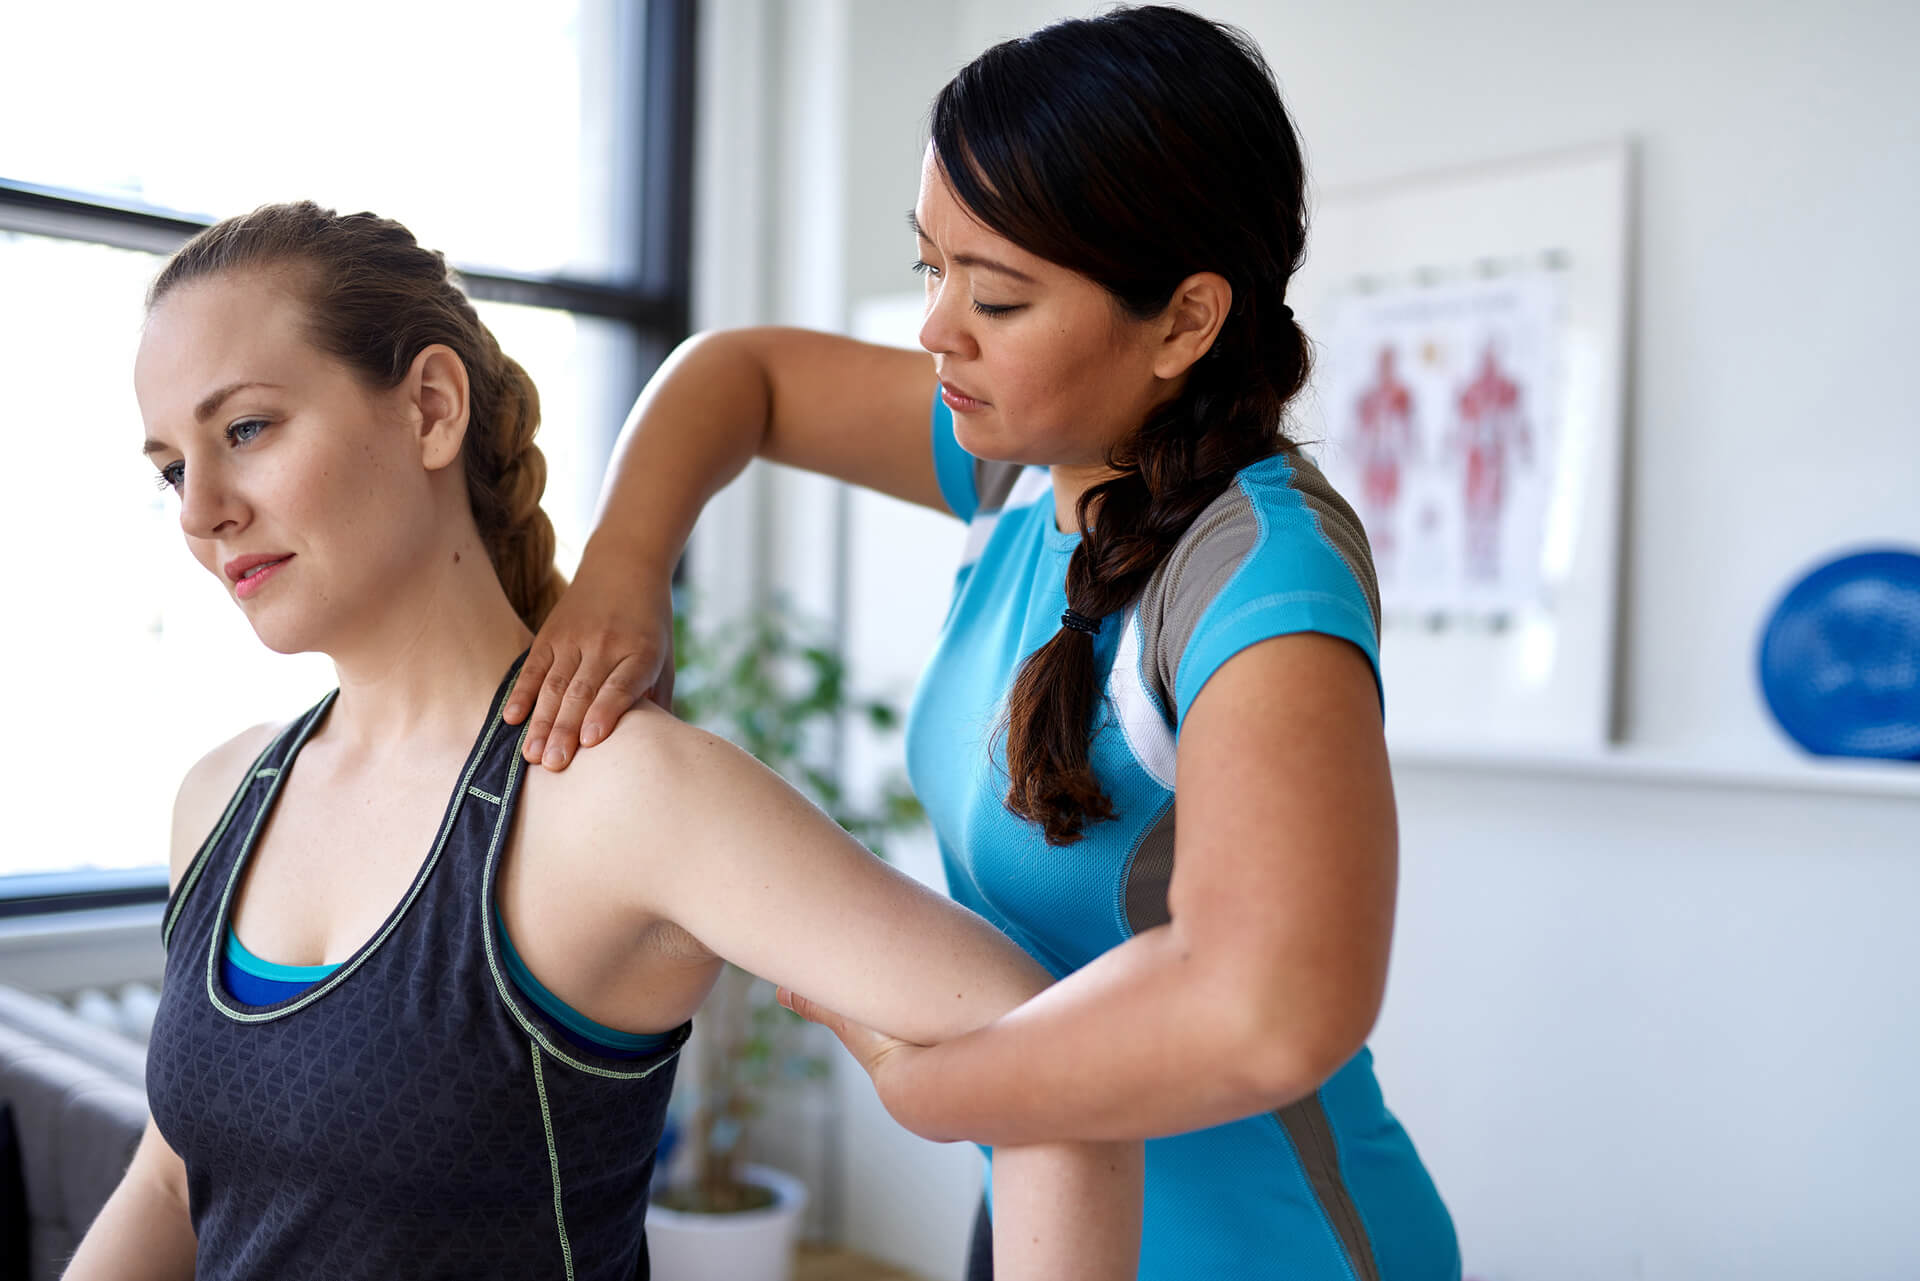 Physio performing physical therapy on patient's shoulder